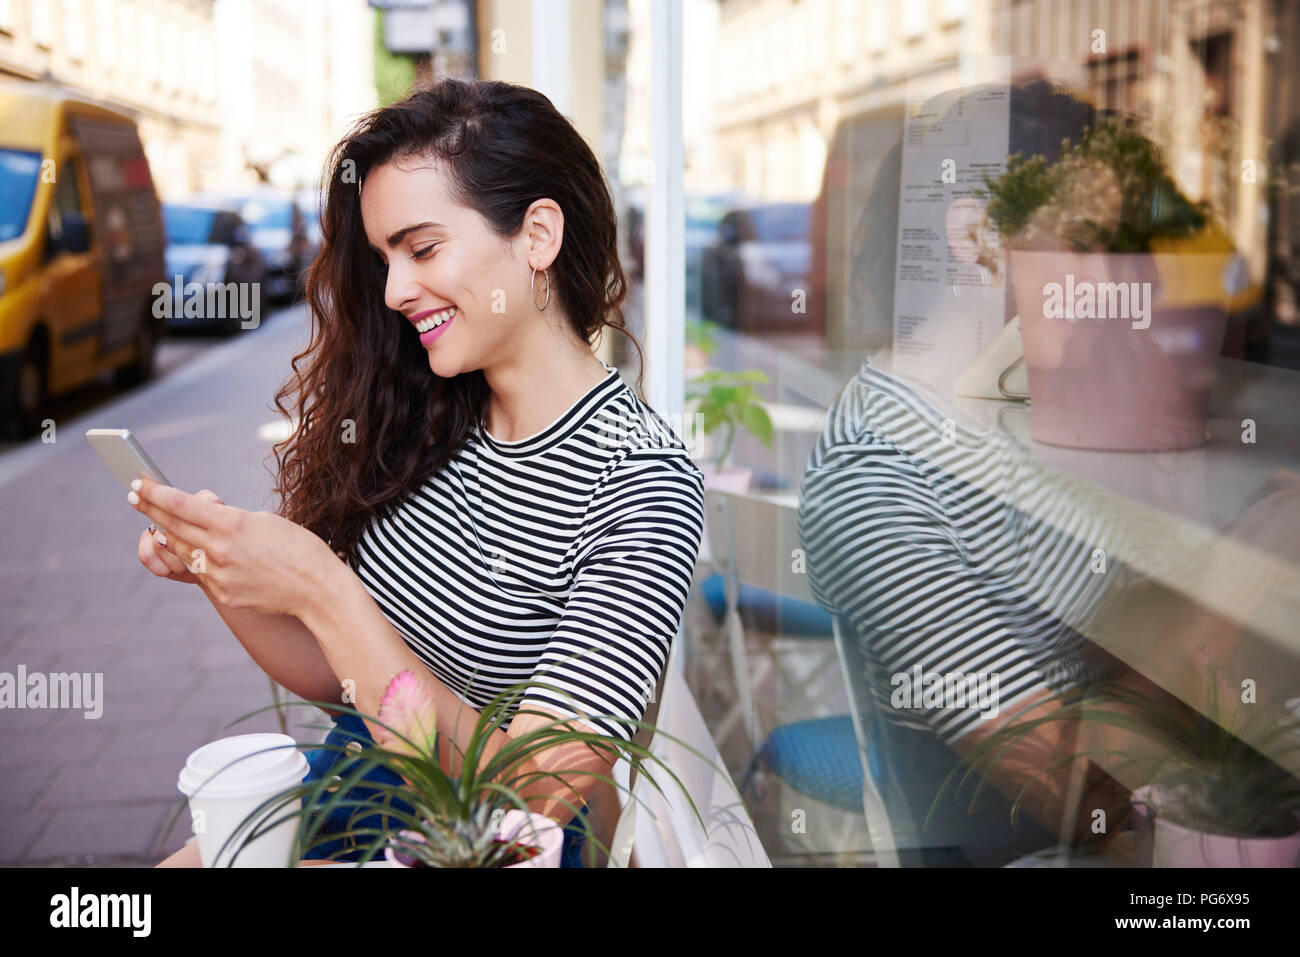 Happy young woman using cell phone at outdoor cafe dans la ville Banque D'Images